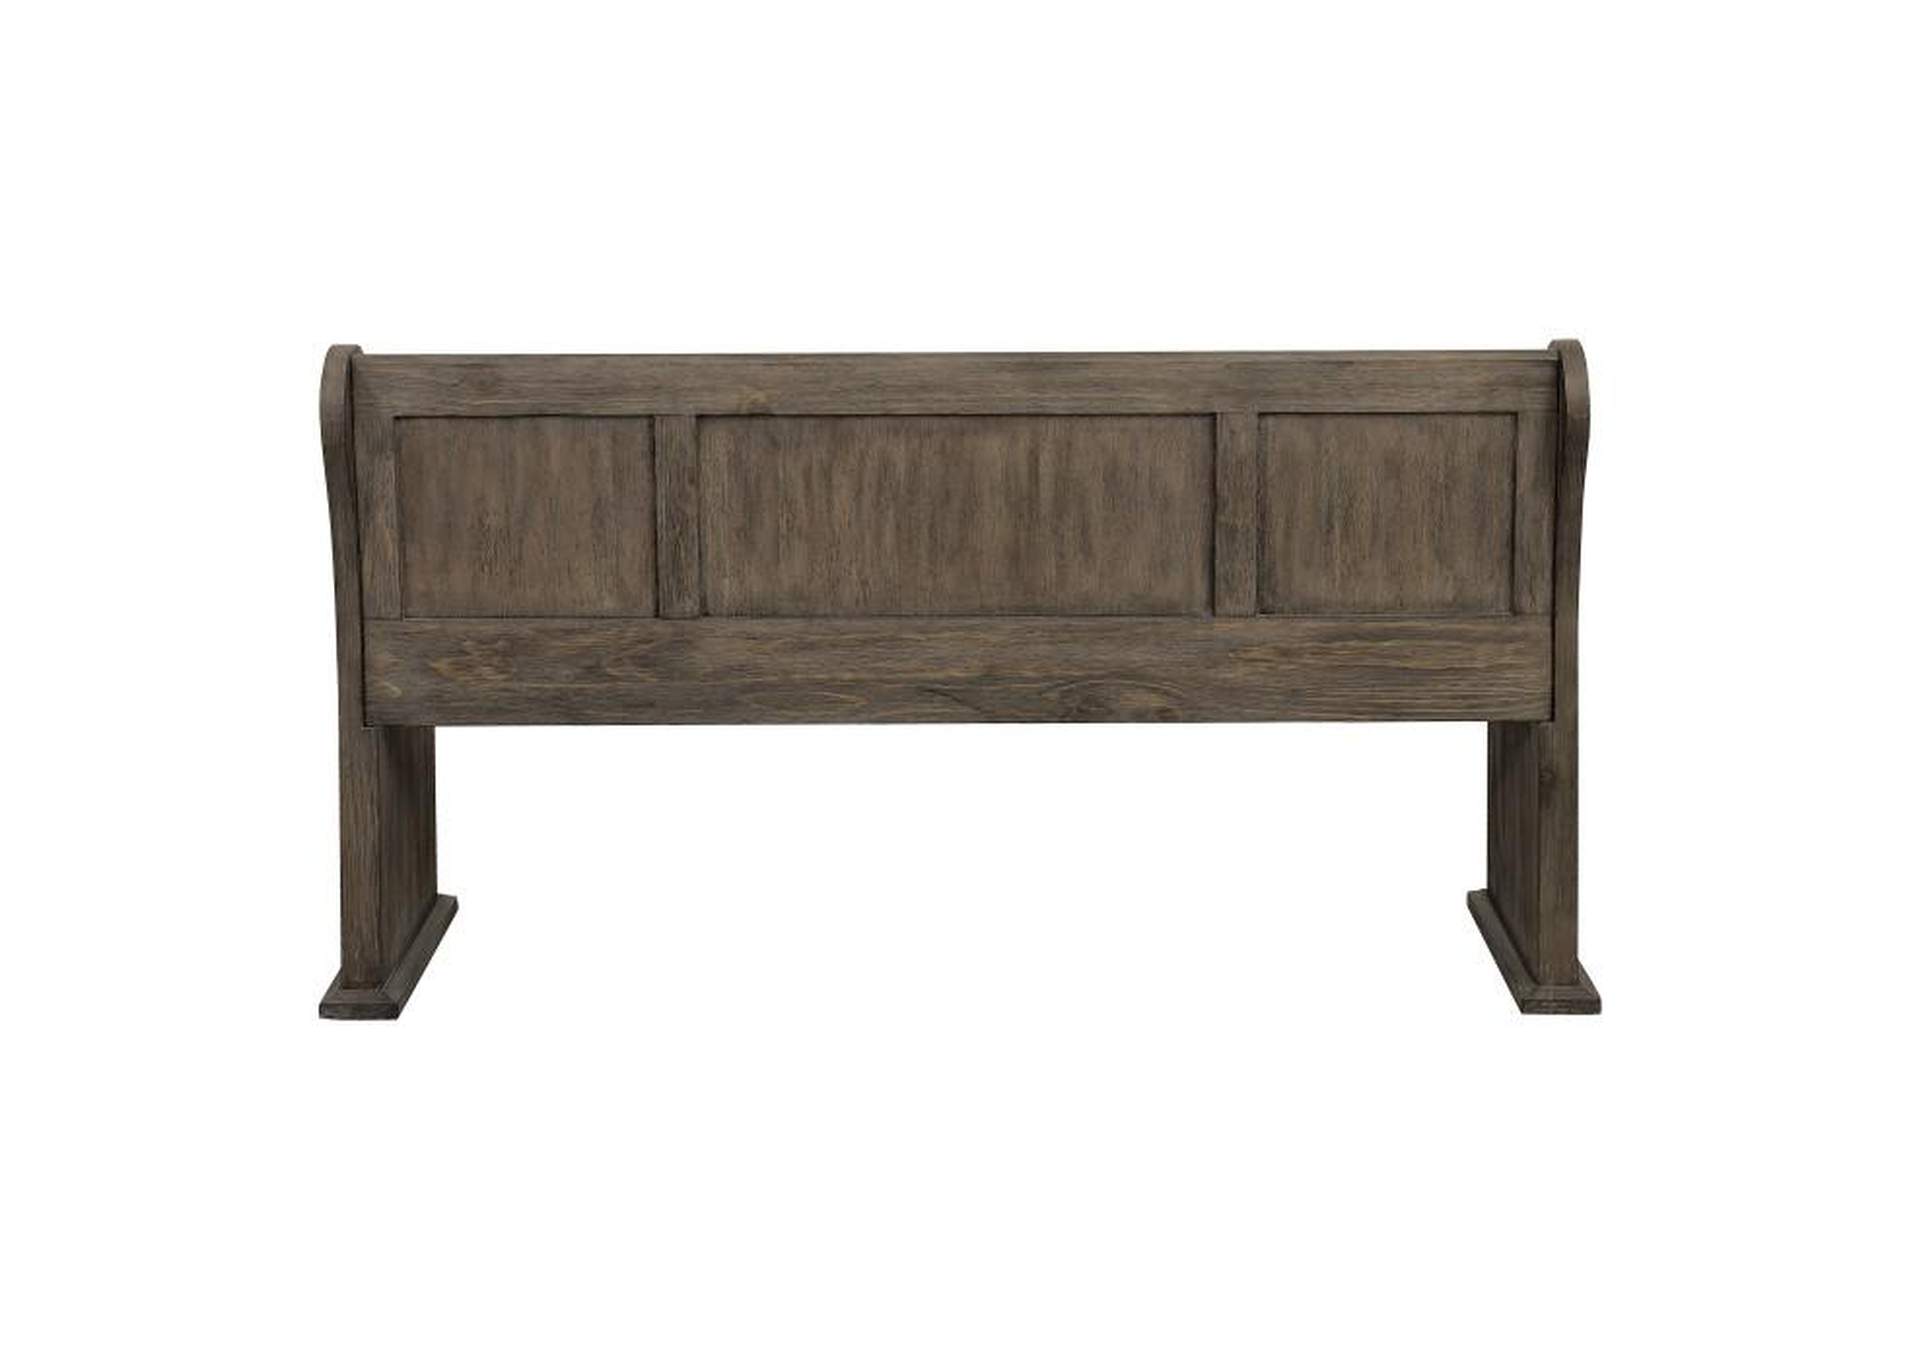 Toulon Bench With Curved Arms,Homelegance